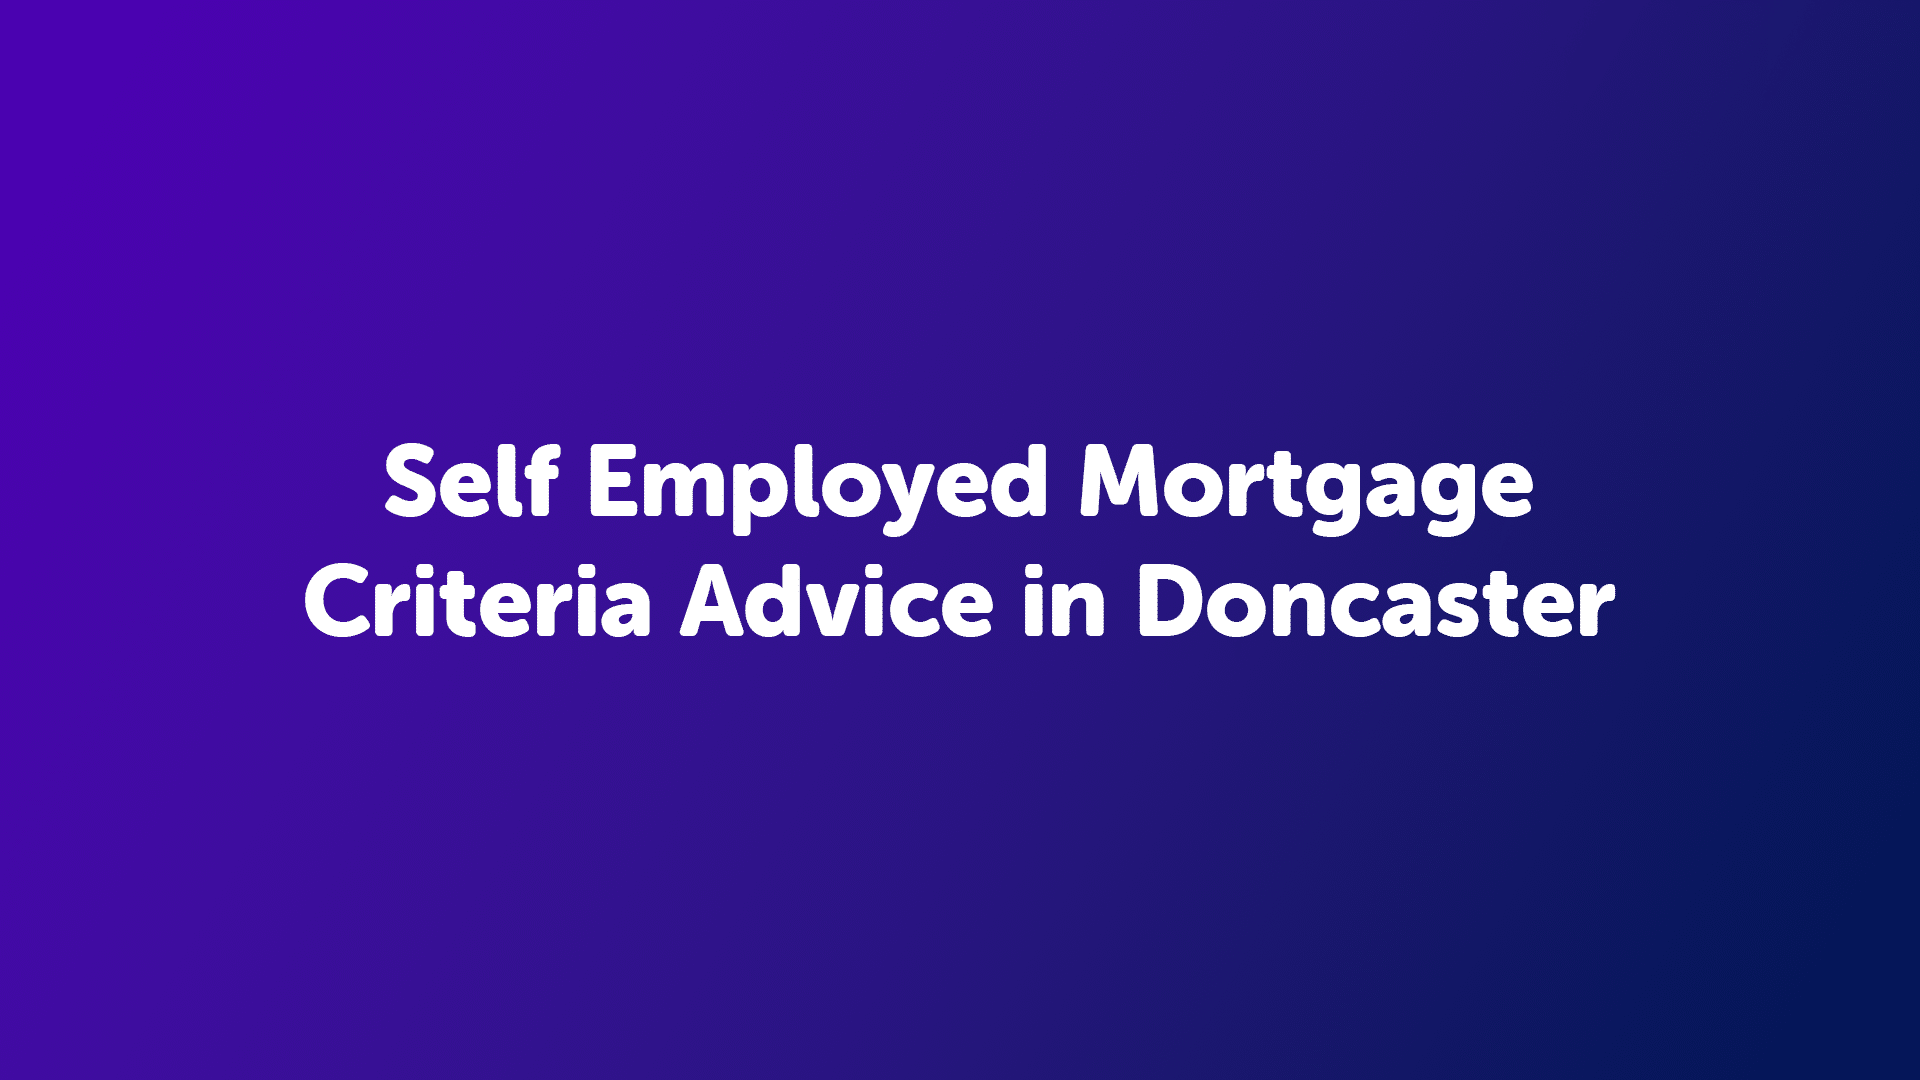 Self Employed Mortgage Criteria Advice in Doncaster